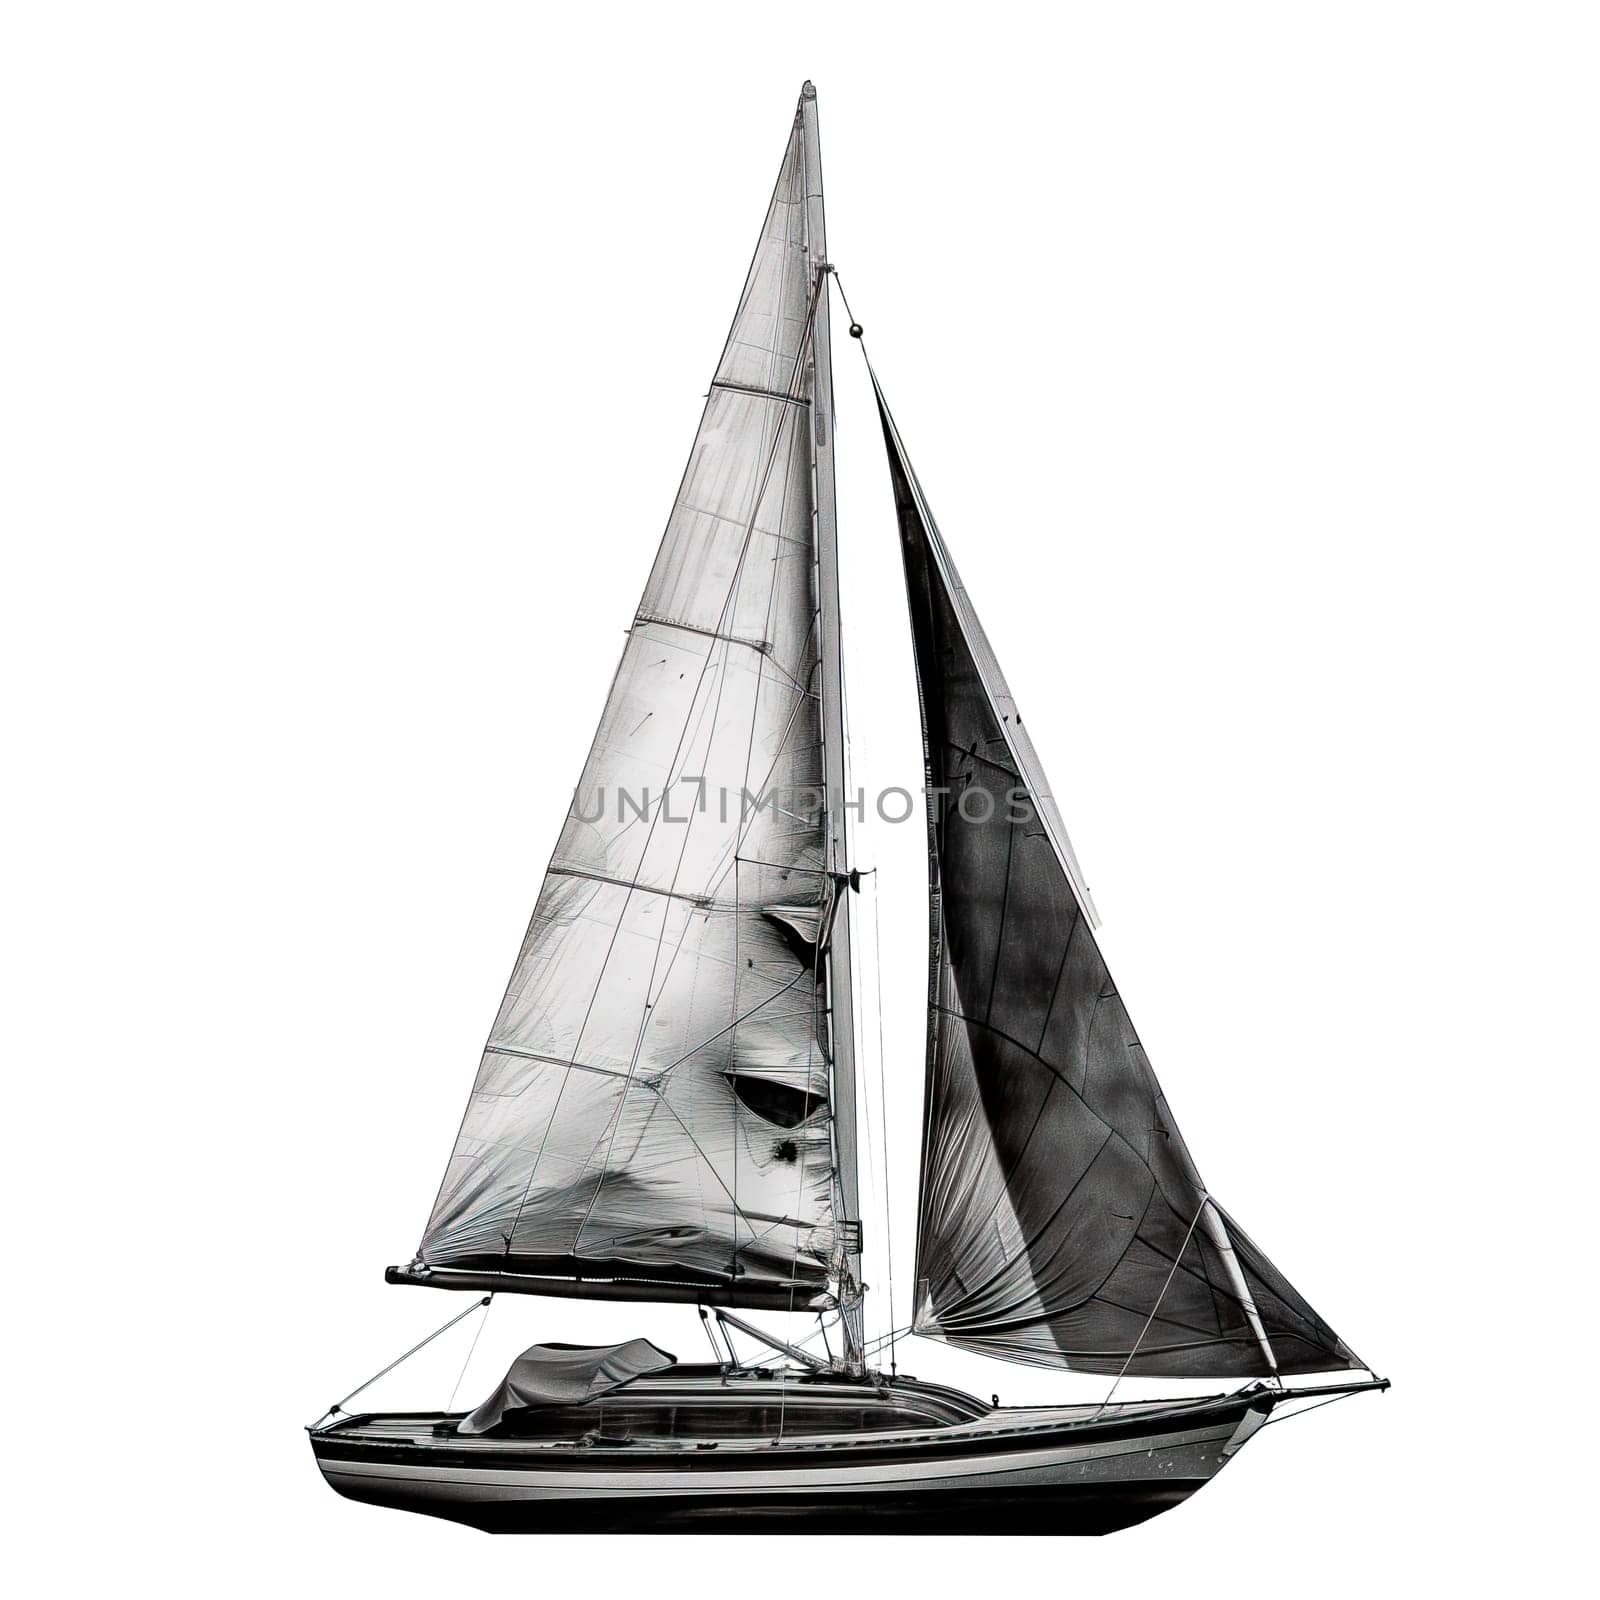 Vintage yacht boat black and white isolated photo by Dustick